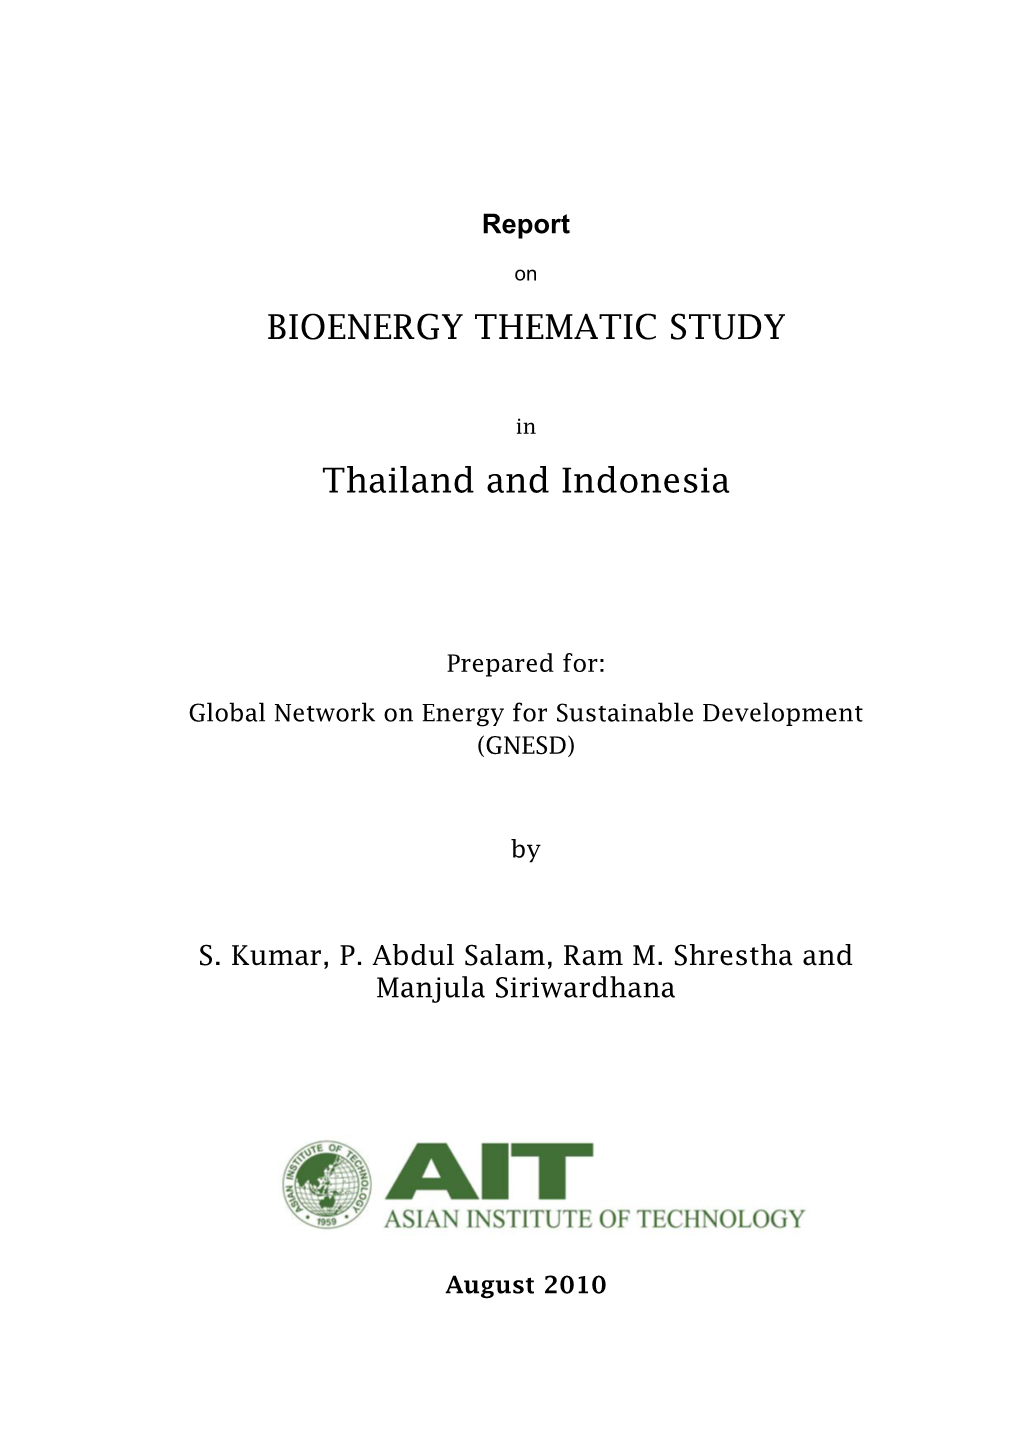 Report on Bioenergy Thematic Study in Thailand and Indonesia